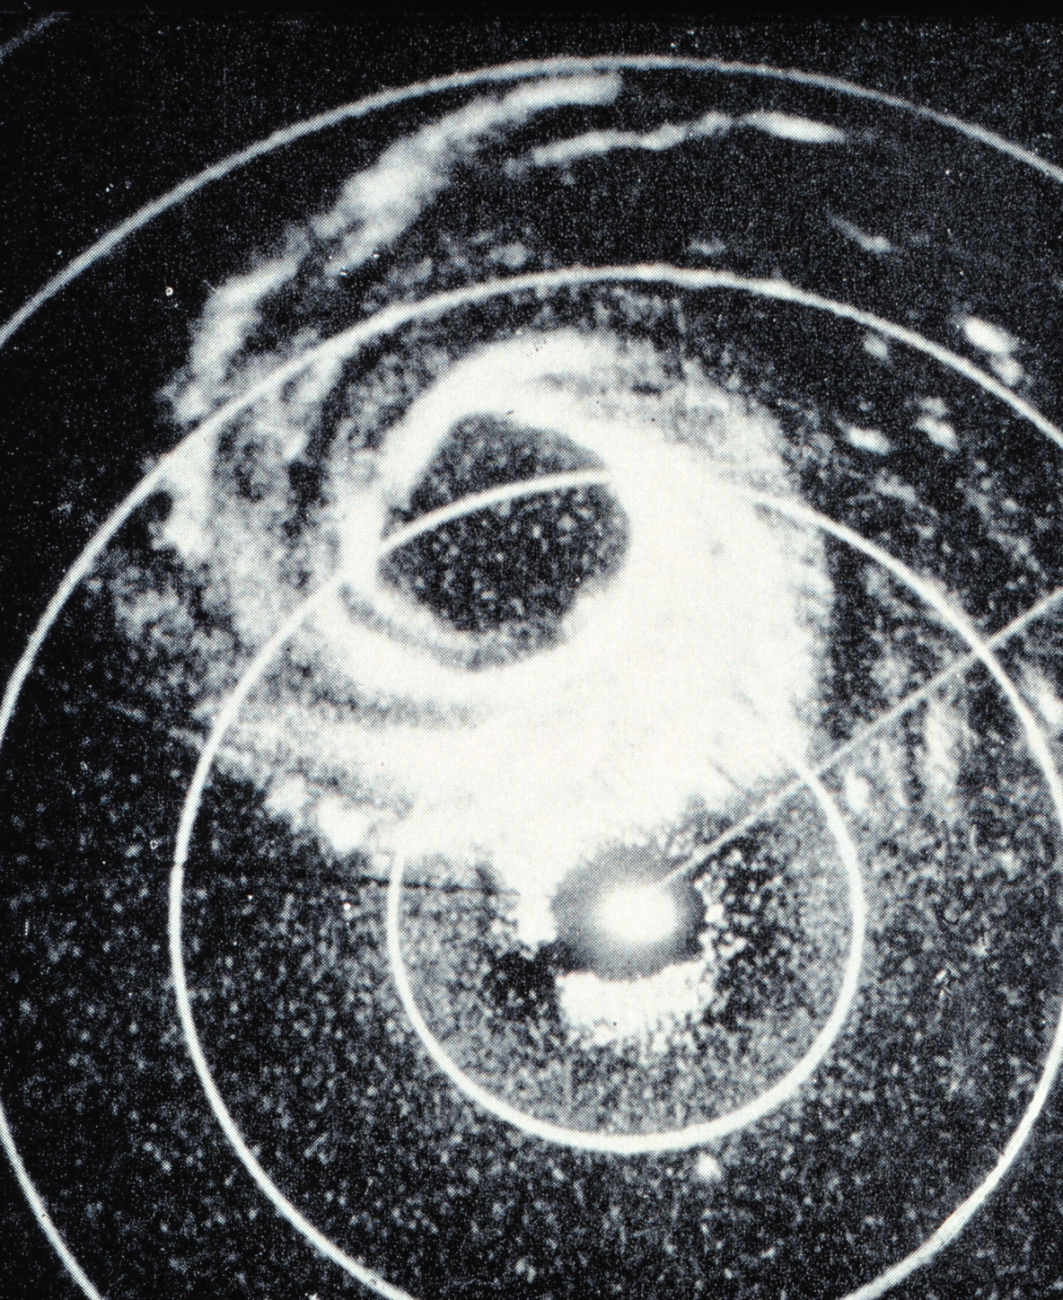 Image of PPI scope of SPS-6 radar on the USS MIDWAY showing rare Januaryhurricane northeast of British Virgin Islands